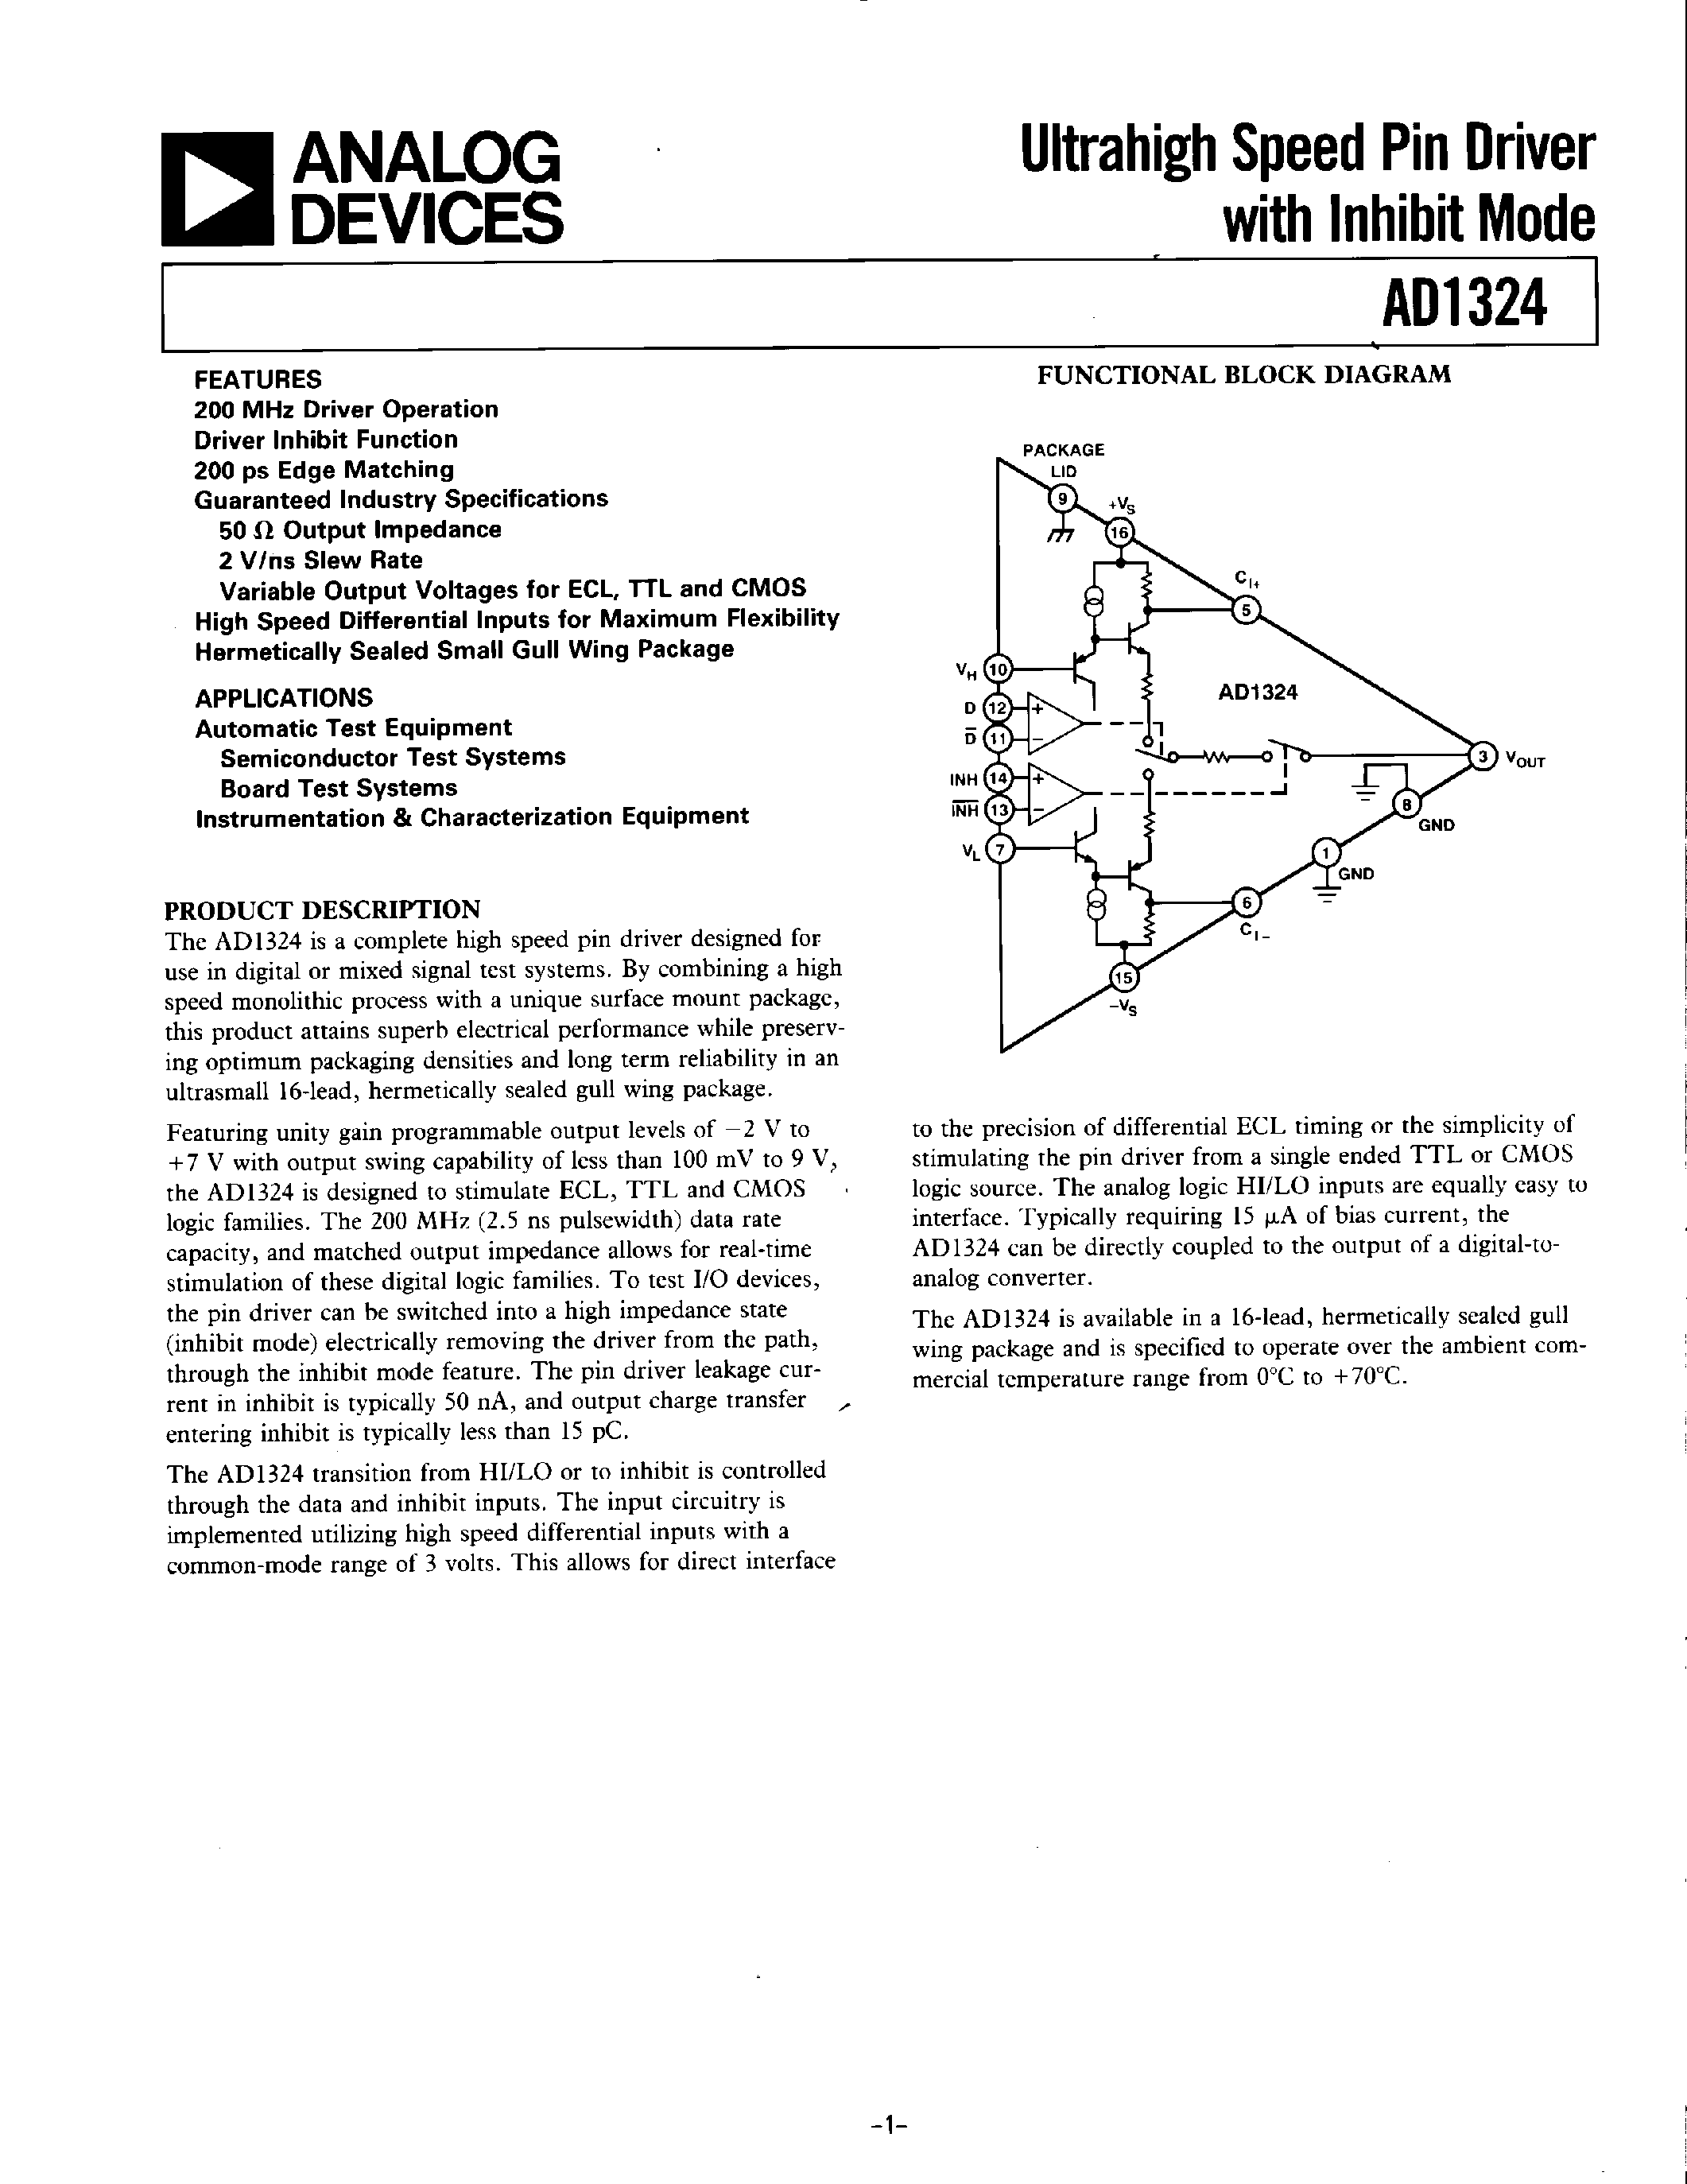 Datasheet AD1324 - Ultrahigh Speed Pin Driver with Inhibit Mode page 1